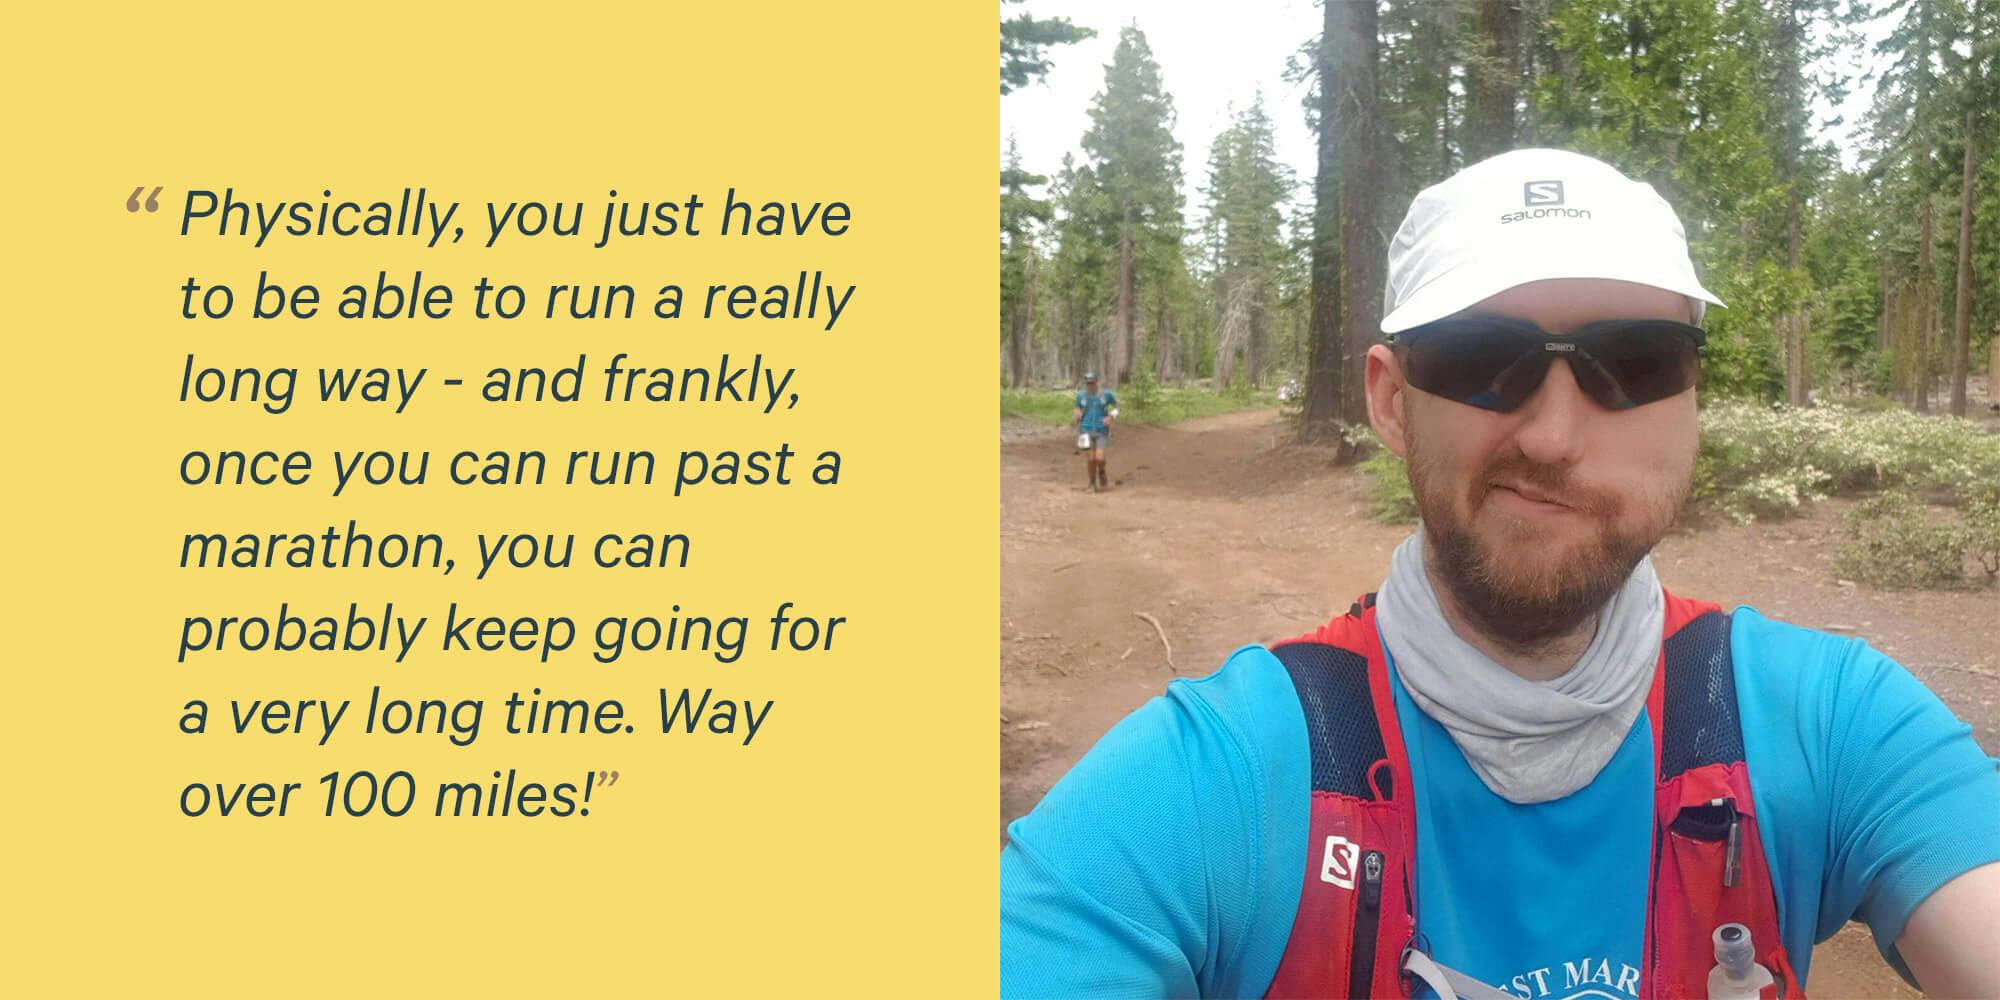 Physically, you just have to be able to run a really long way - and frankly, once you can run past a marathon, you can probably keep going for a very long time. Way over 100 miles! 